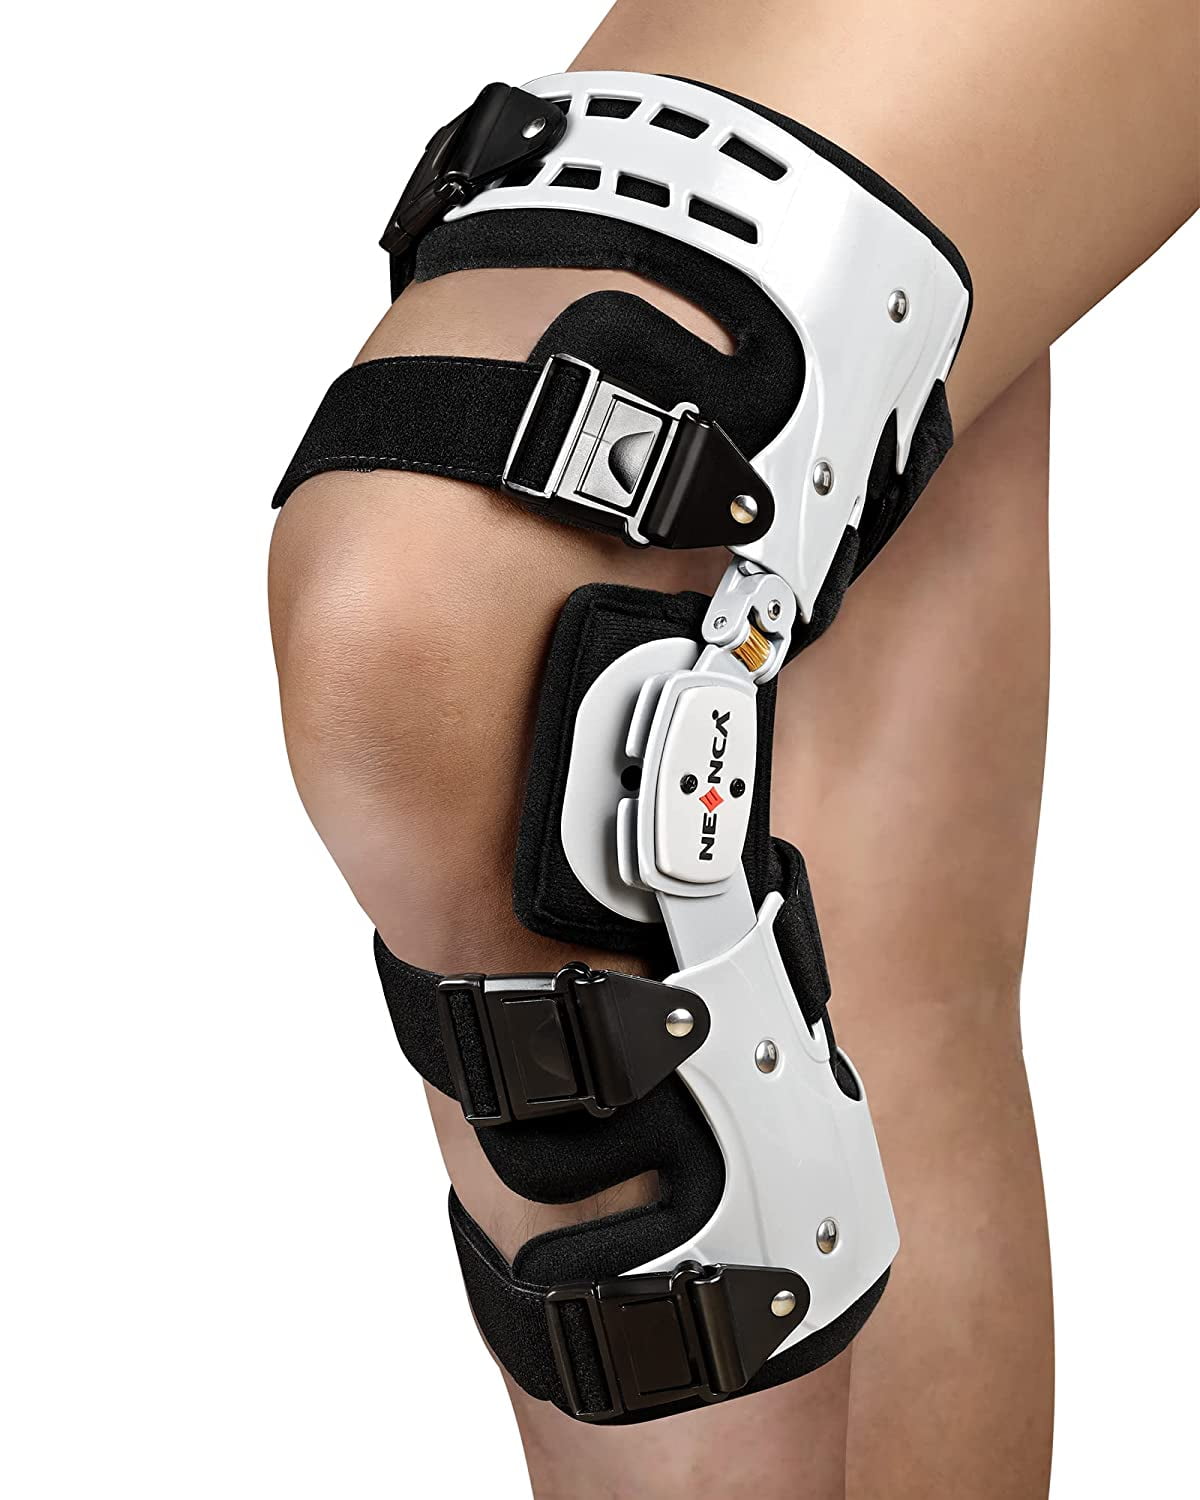 NEENCA Professional Medical Knee Brace,Suitable for Men and Women. Right. 